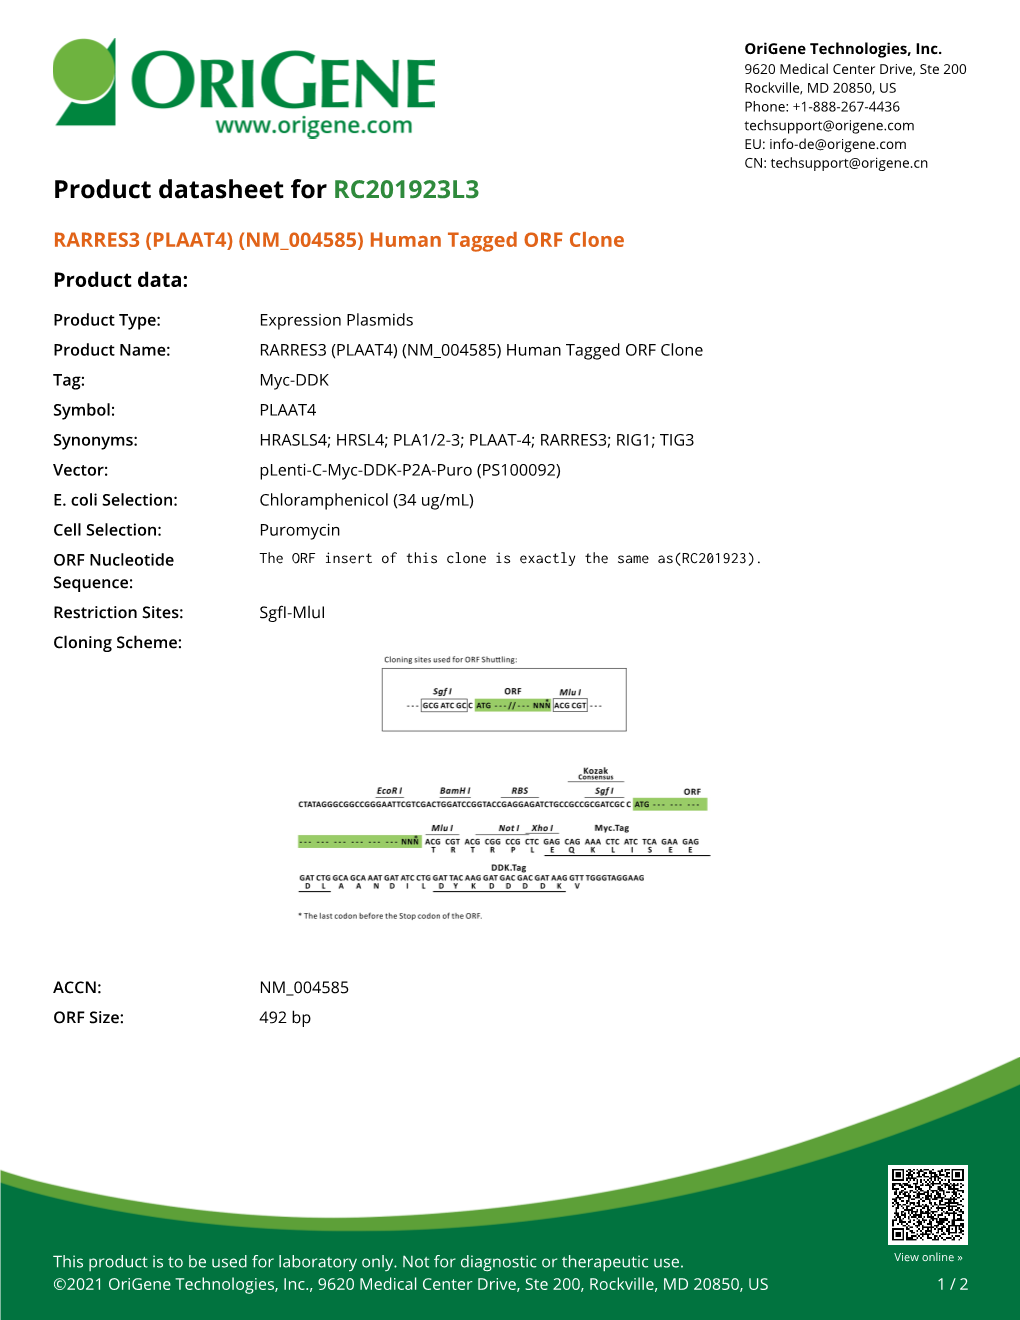 RARRES3 (PLAAT4) (NM 004585) Human Tagged ORF Clone Product Data